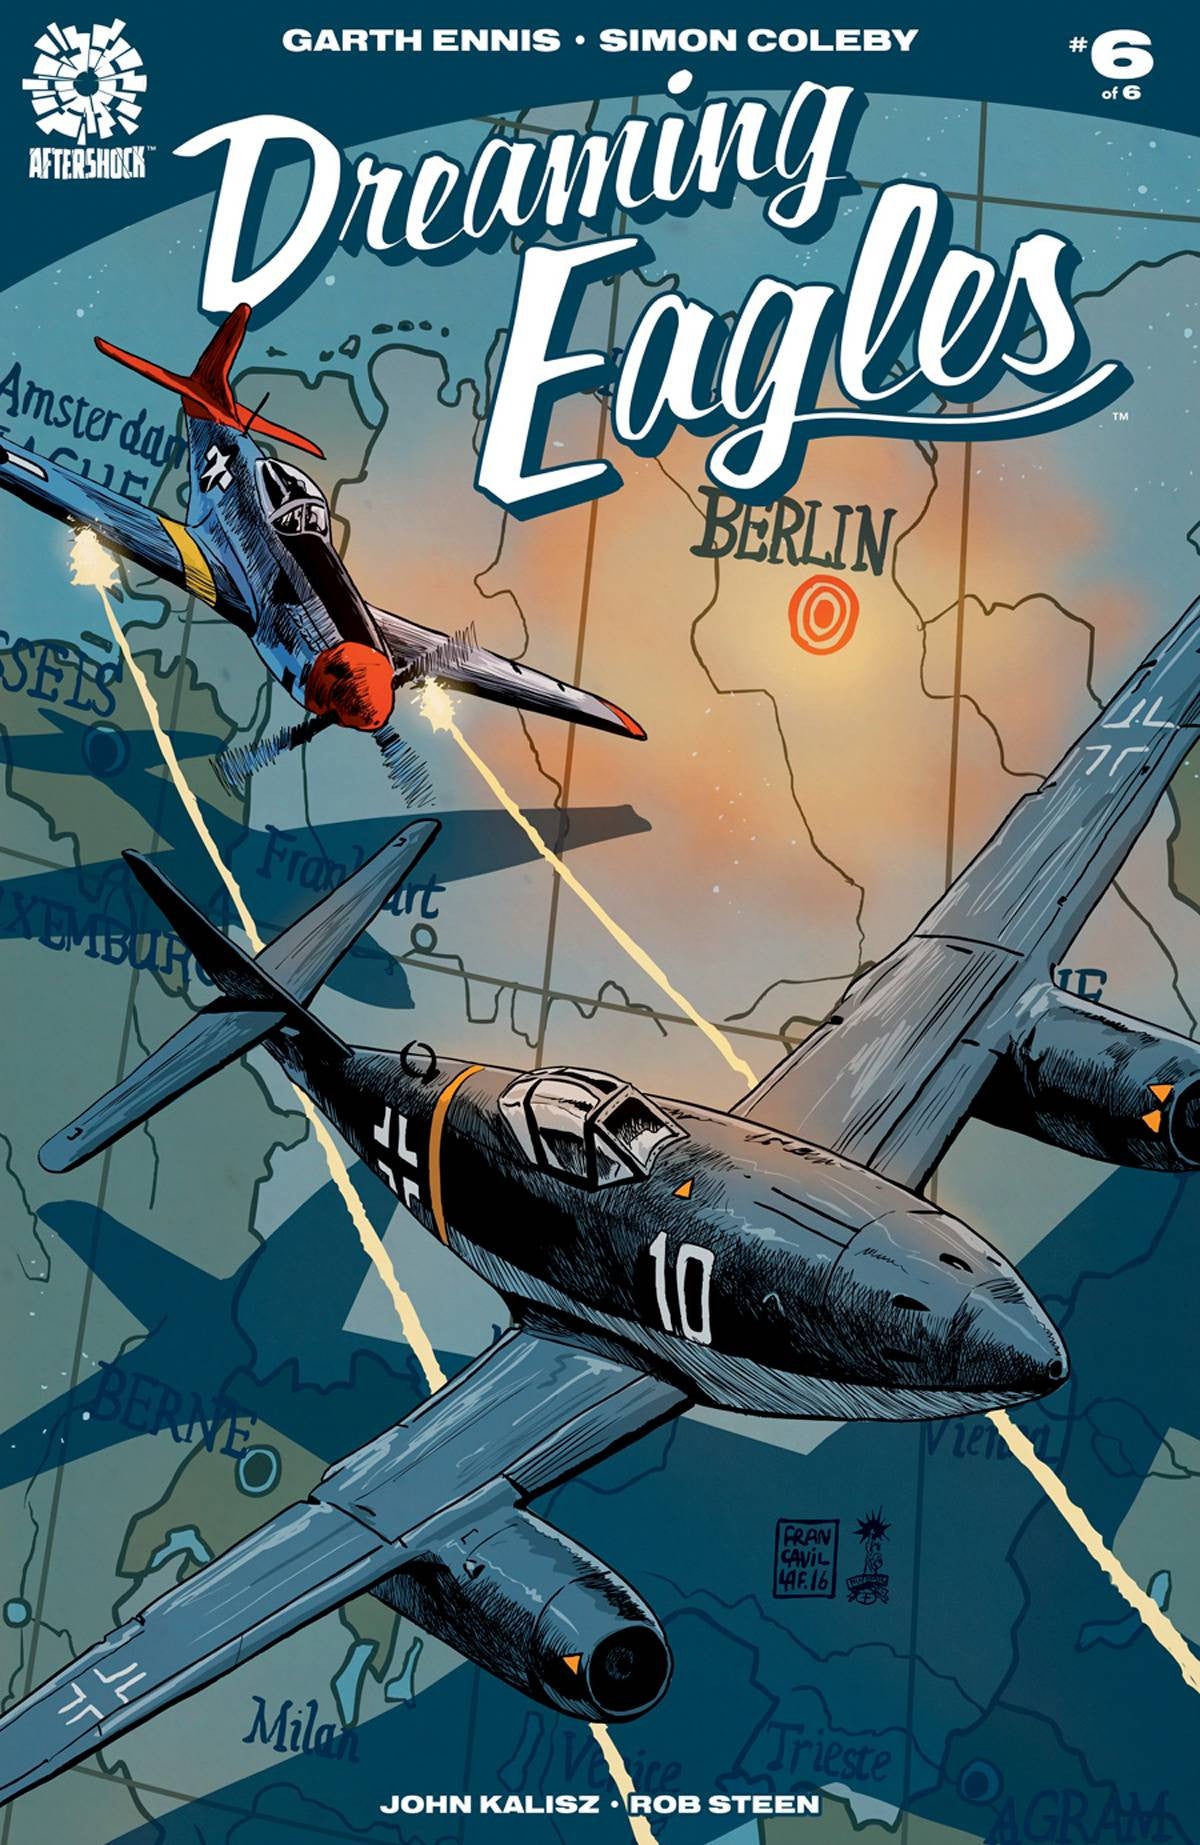 DREAMING EAGLES #6 (OF 6) (MR) COVER